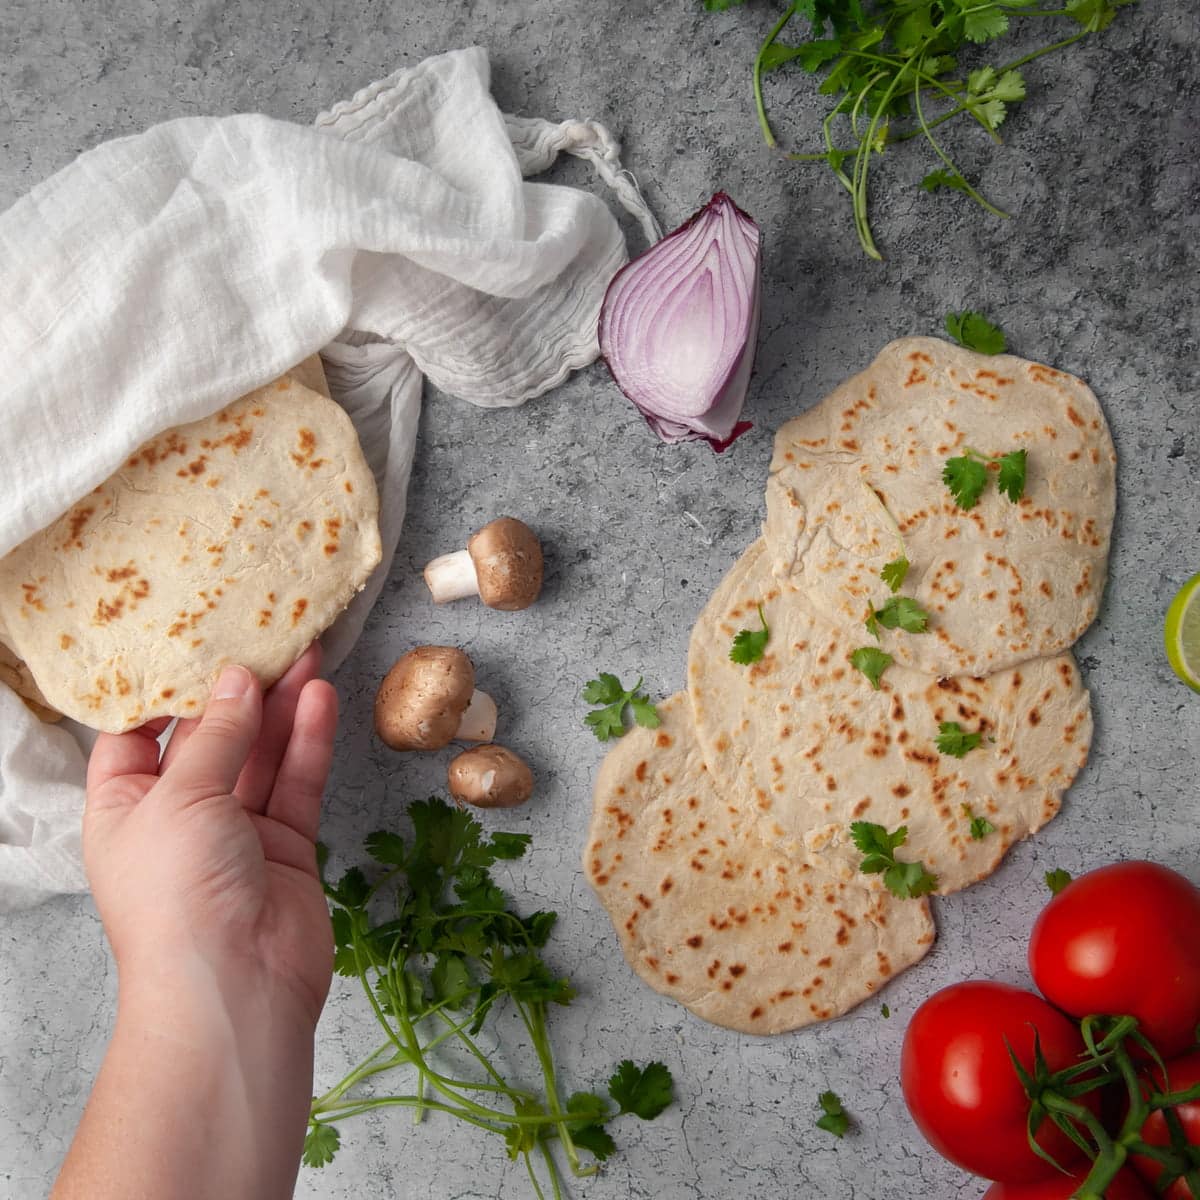 hand grabbing a tortilla from the pile to stuff it with fresh ingredients